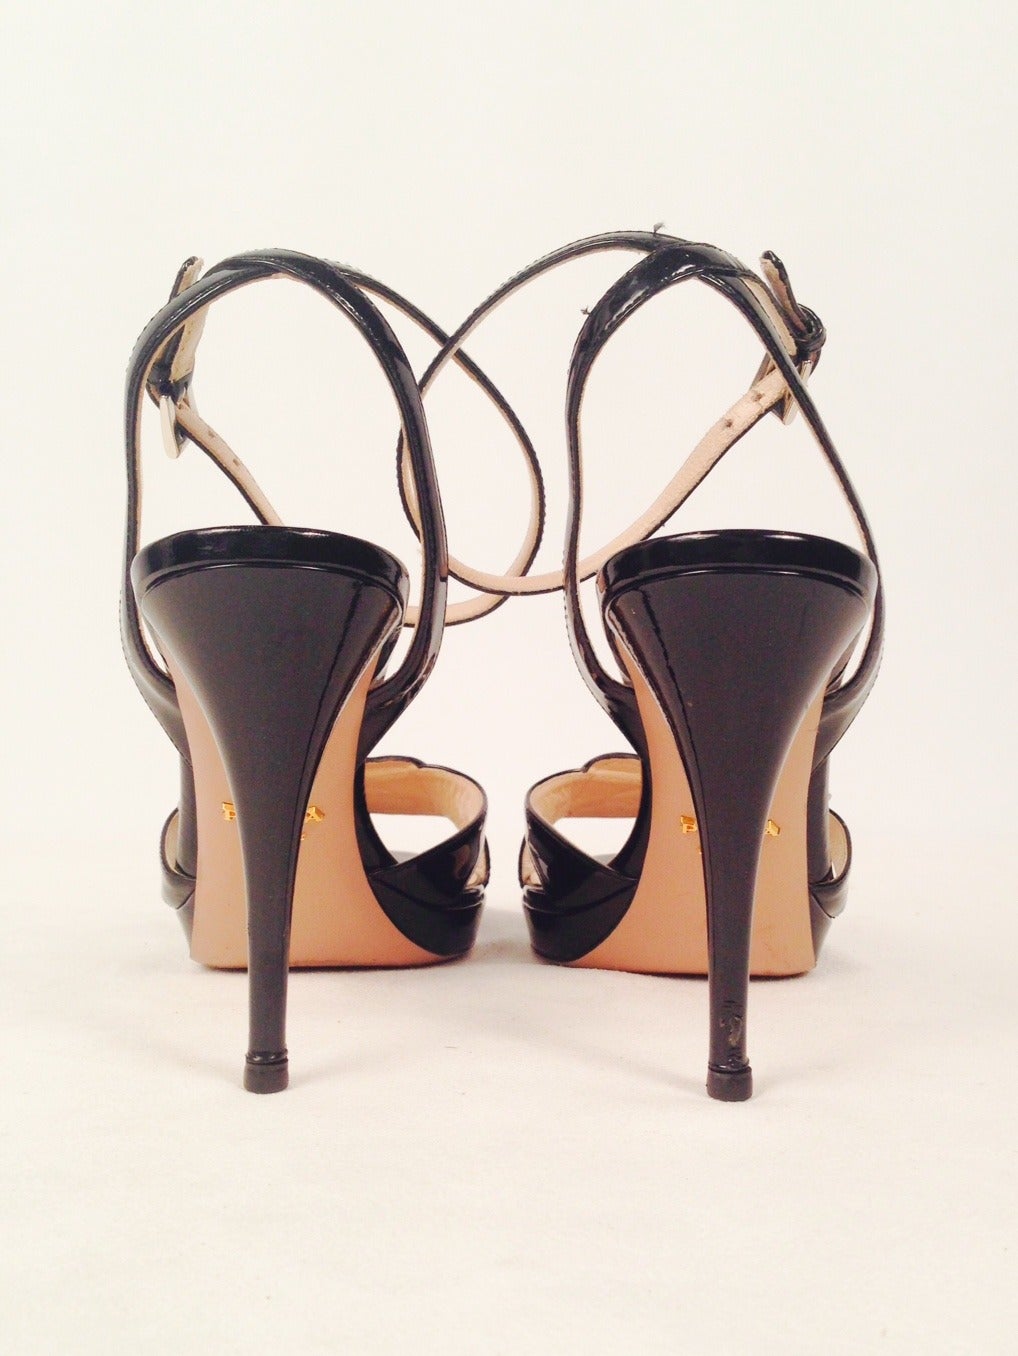 Prada Smoking Lips Ankle Strap Patent High Heel Sandals In Good Condition For Sale In Palm Beach, FL